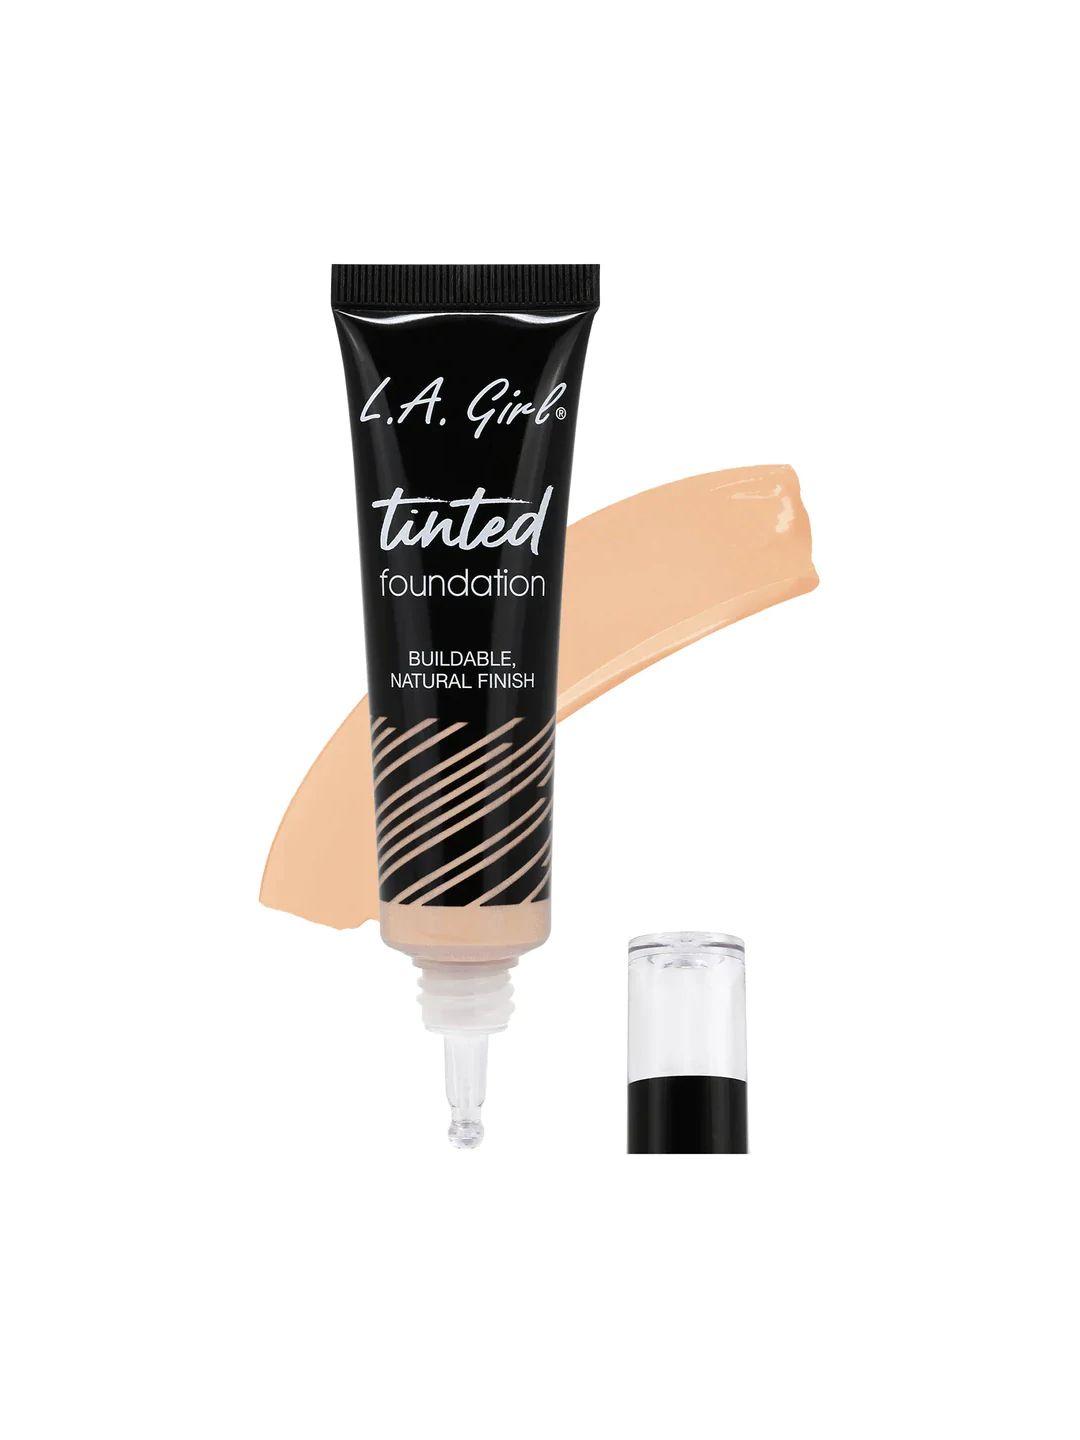 l.a girl buildable natural finish tinted foundation 30 ml - porcelain